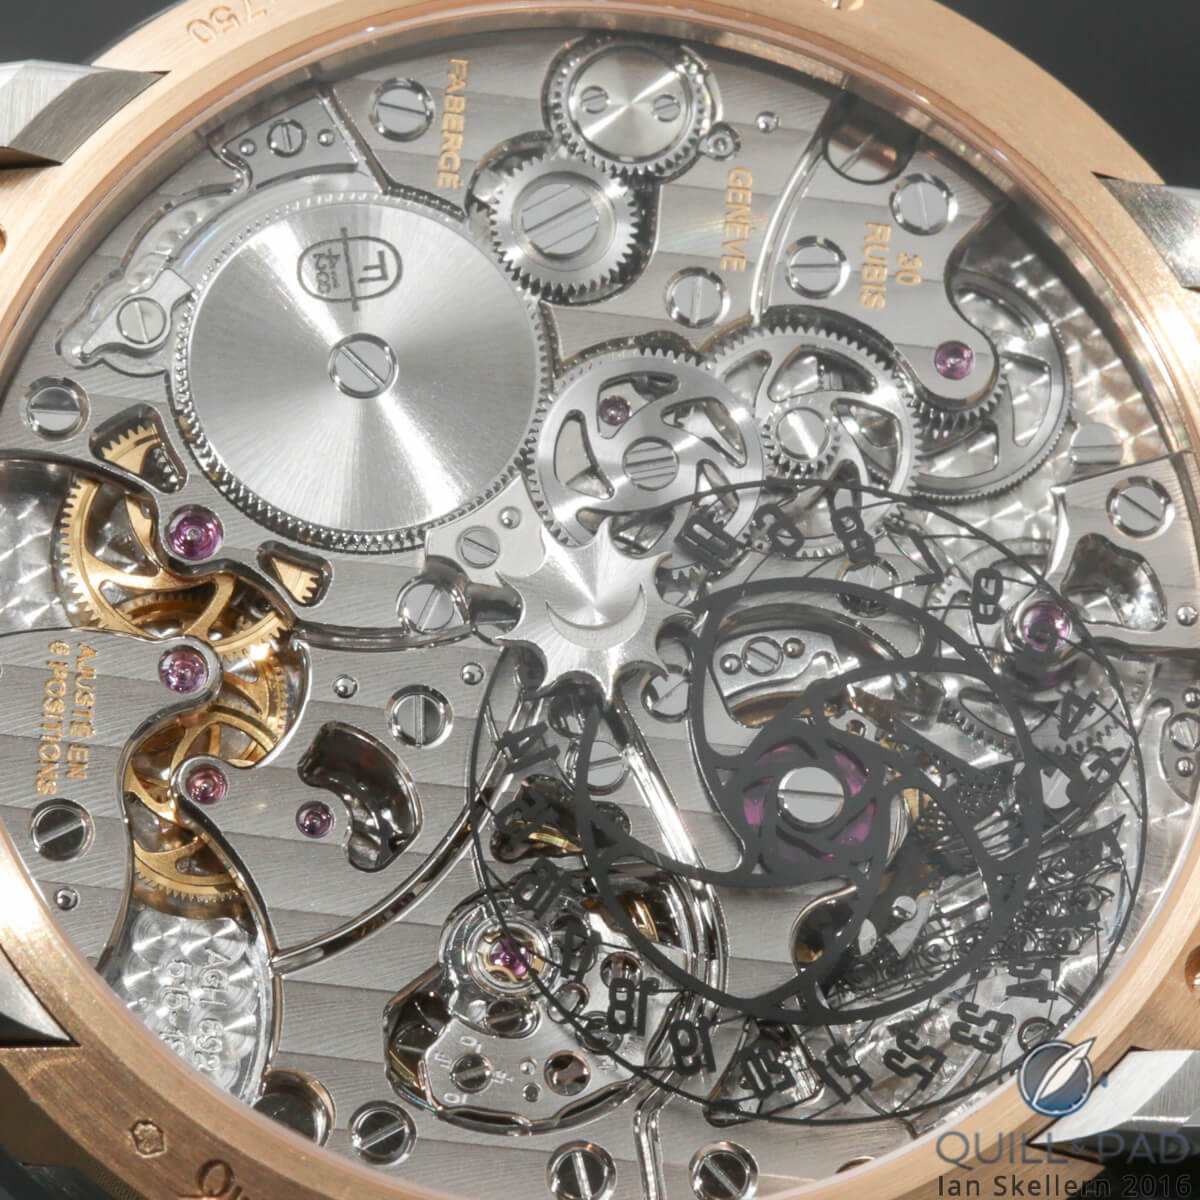 A close up look at the absolutely stunning movement of the Fabergé DTZ